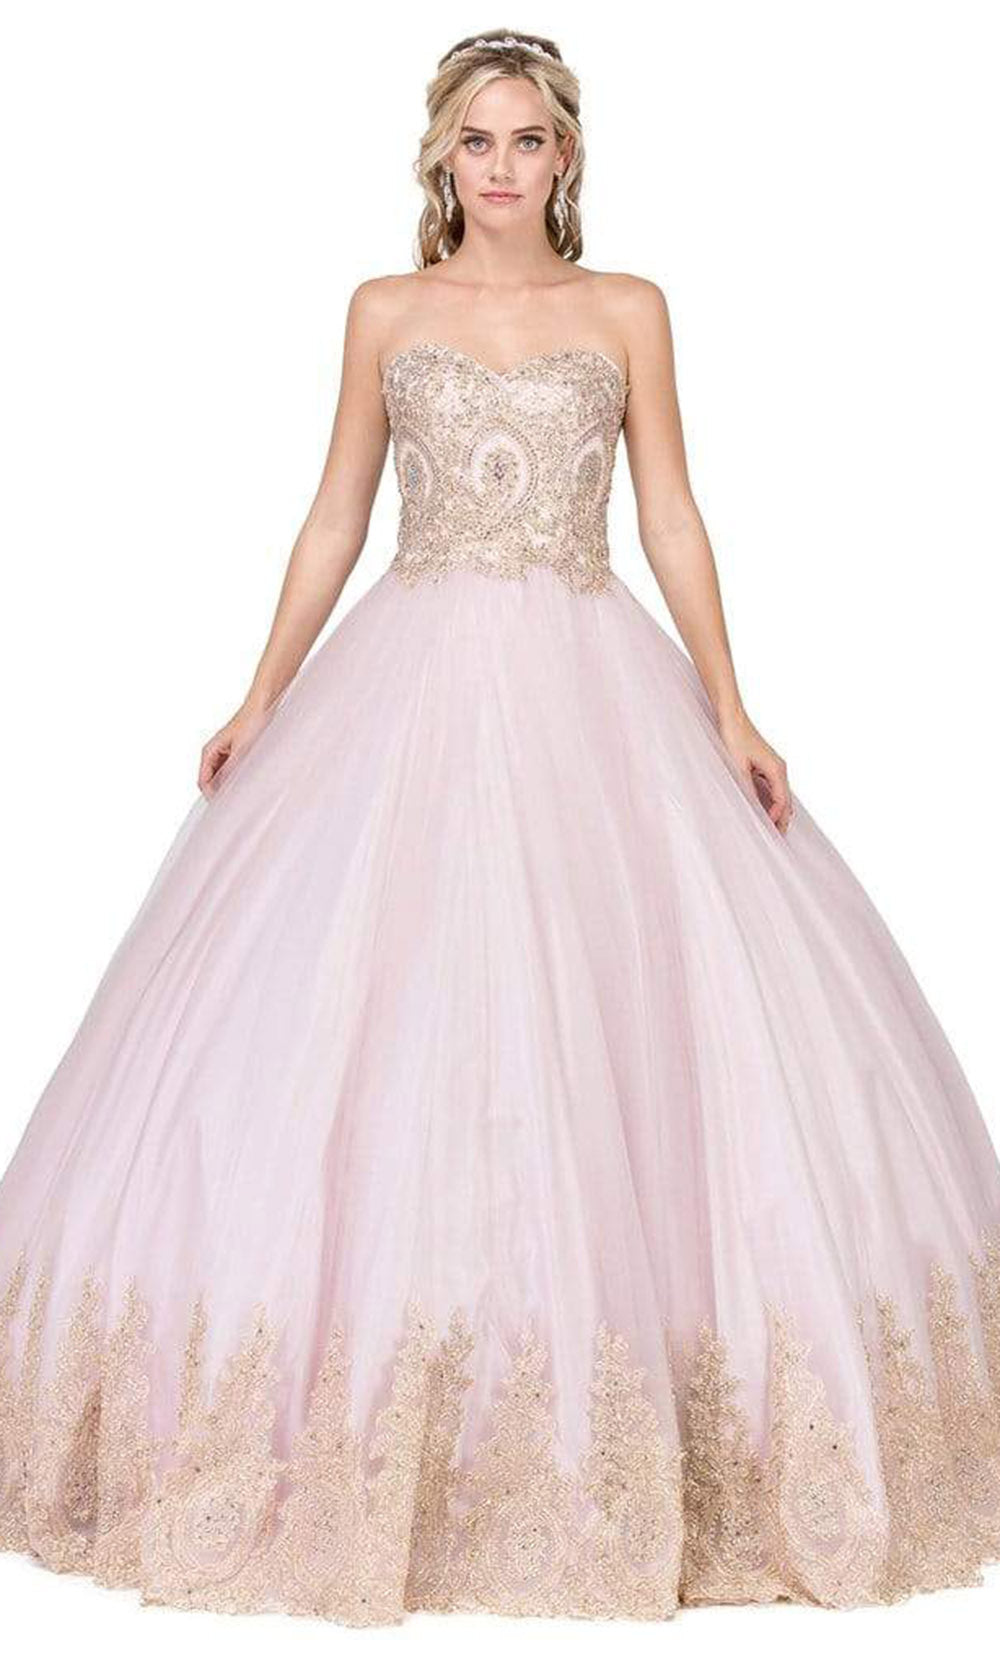 Dancing Queen - 1115 Strapless Sweetheart Embroidered Lace Ballgown In Pink